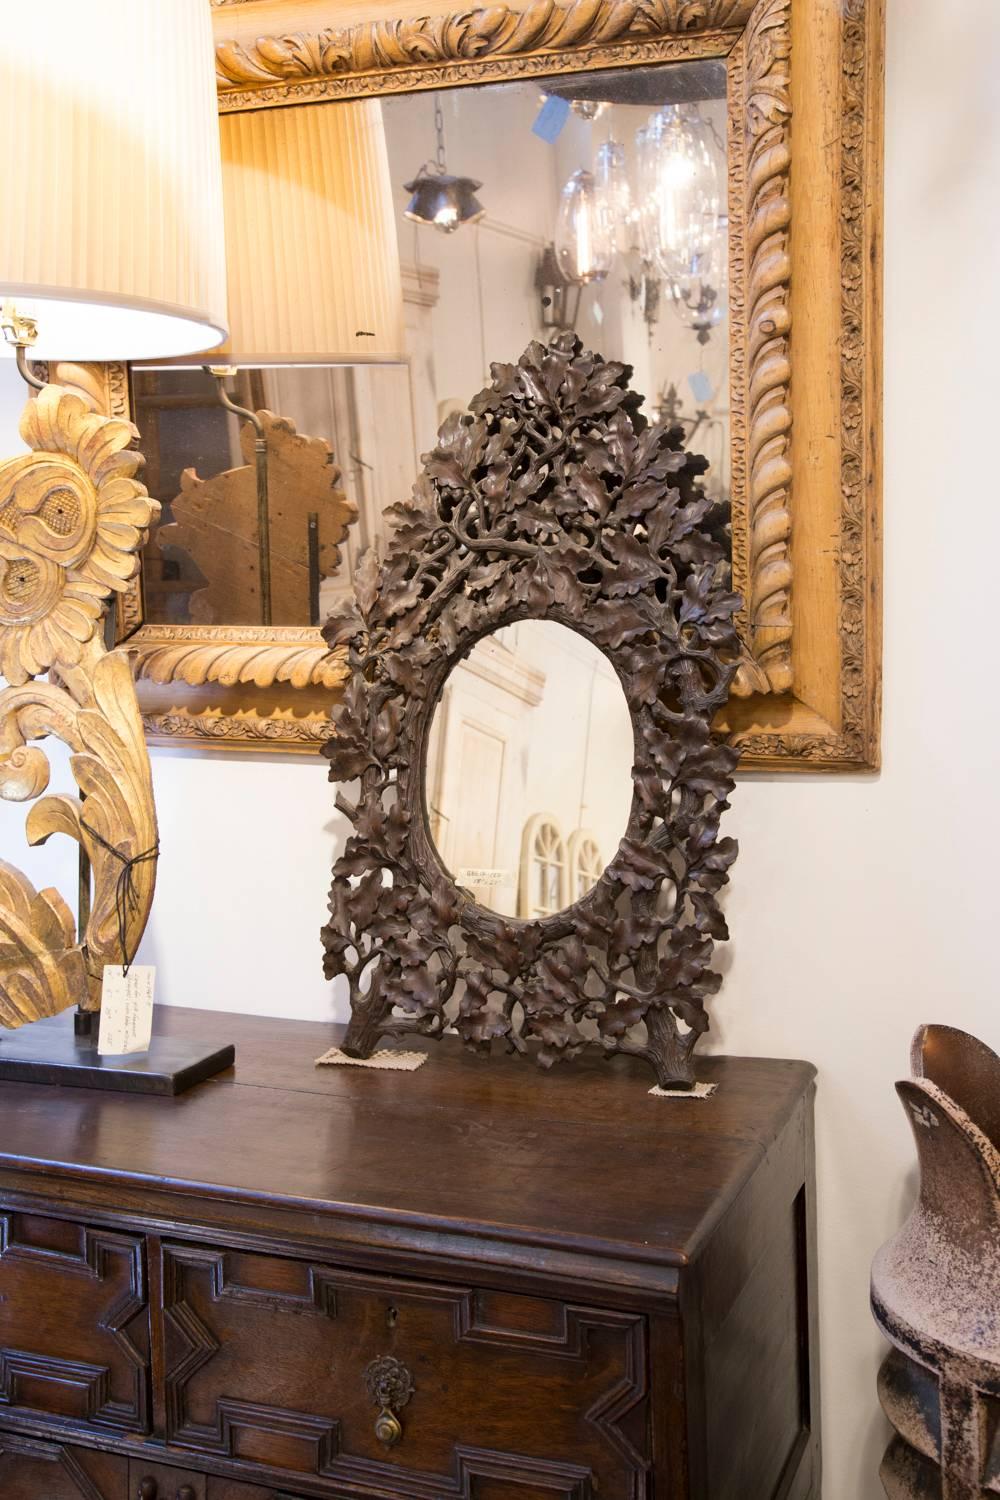 This elaborately carved French Black Forest oak mirror from the 19th century is made of a central oval clear glass mirror. Our eye however, is immediately drawn to the beautifully detailed frame, made of oak leaves attached to their branches. Its